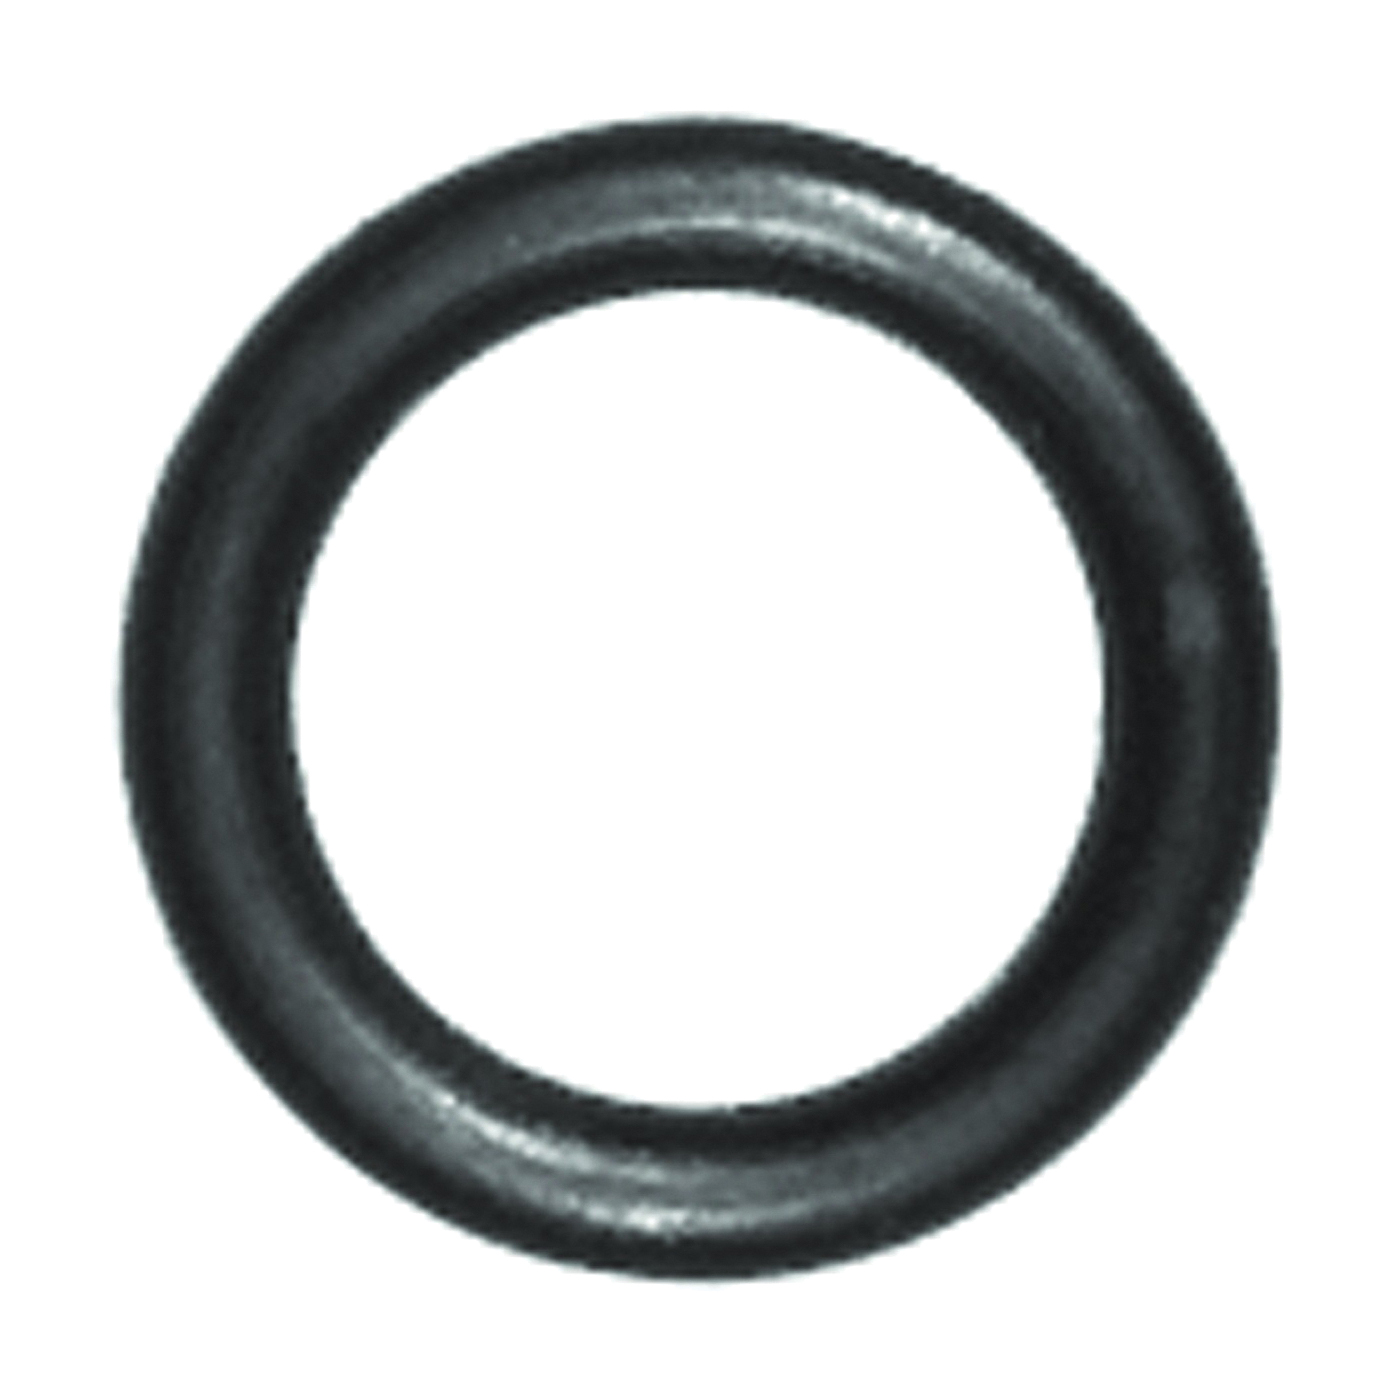 96723 Faucet O-Ring, #6, 5/16 in ID x 7/16 in OD Dia, 1/16 in Thick, Rubber